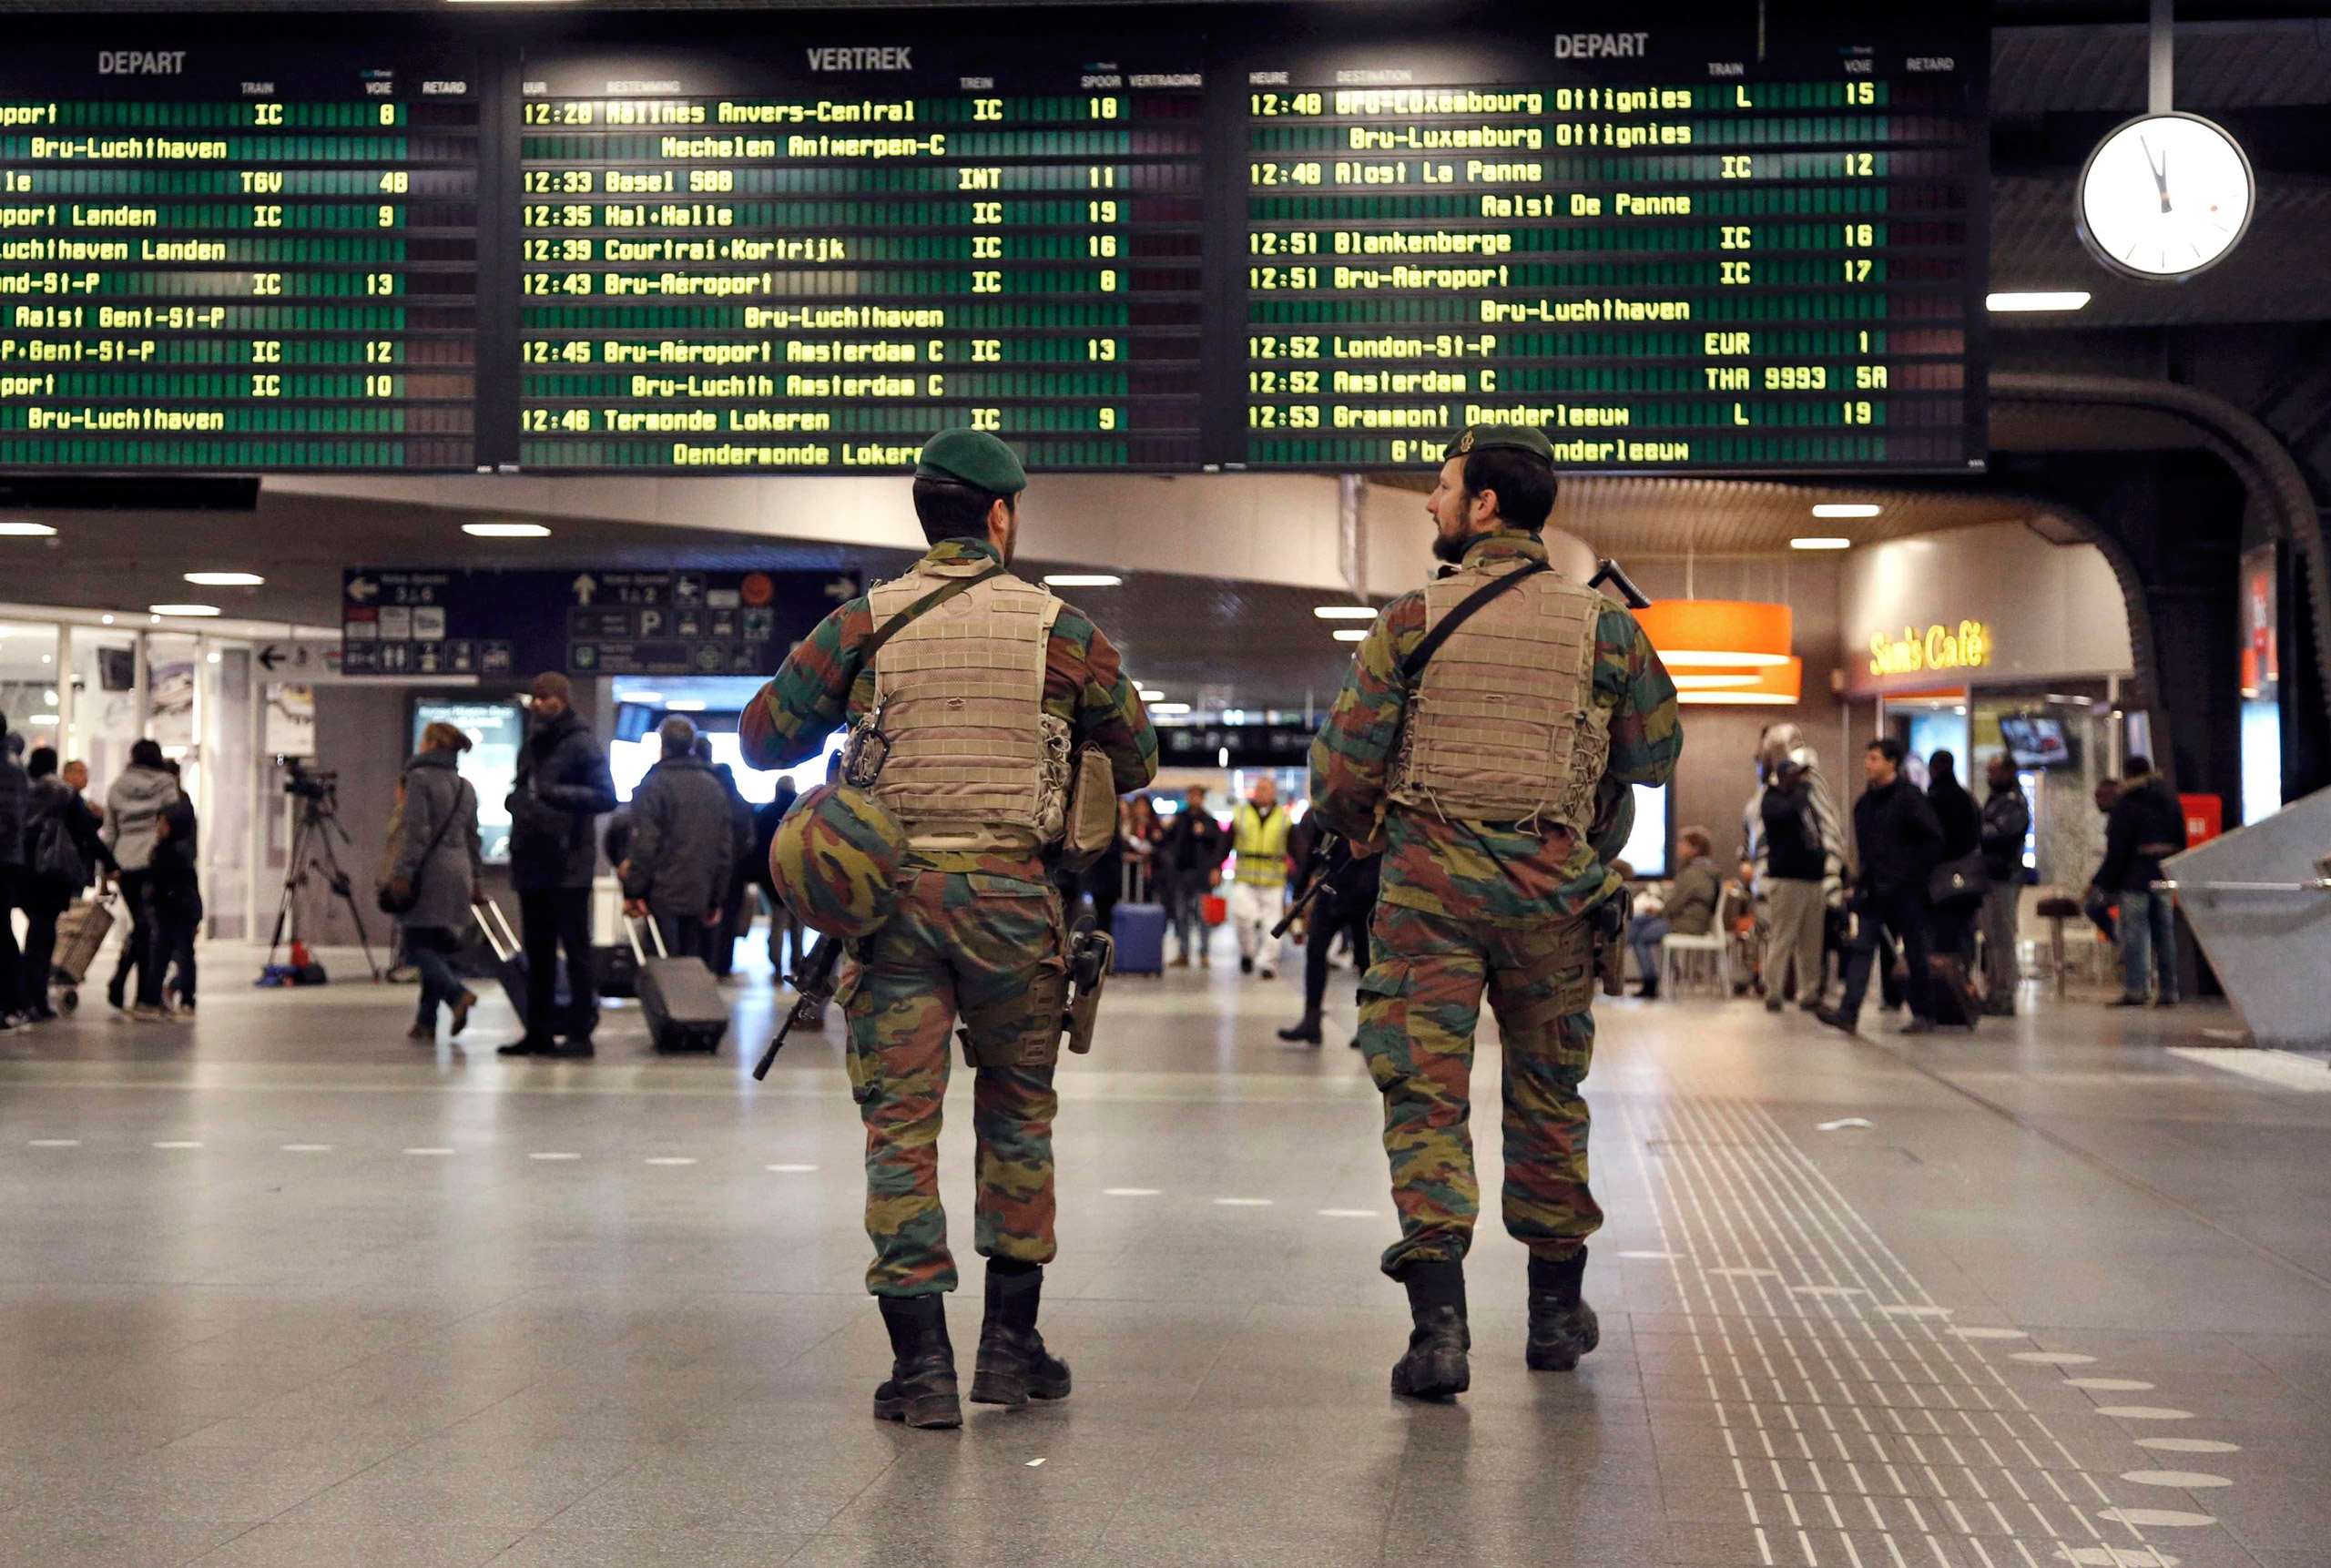 Belgian soldiers patrol in the arrival hall at Midi railway station in Brussels, November 21, 2015, after security was tightened in Belgium following the fatal attacks in Paris. Belgium raised the alert status for its capital Brussels to the highest level on Saturday, shutting the metro and warning the public to avoid crowds because of a "serious and imminent" threat of an attack.  REUTERS/Francois Lenoir